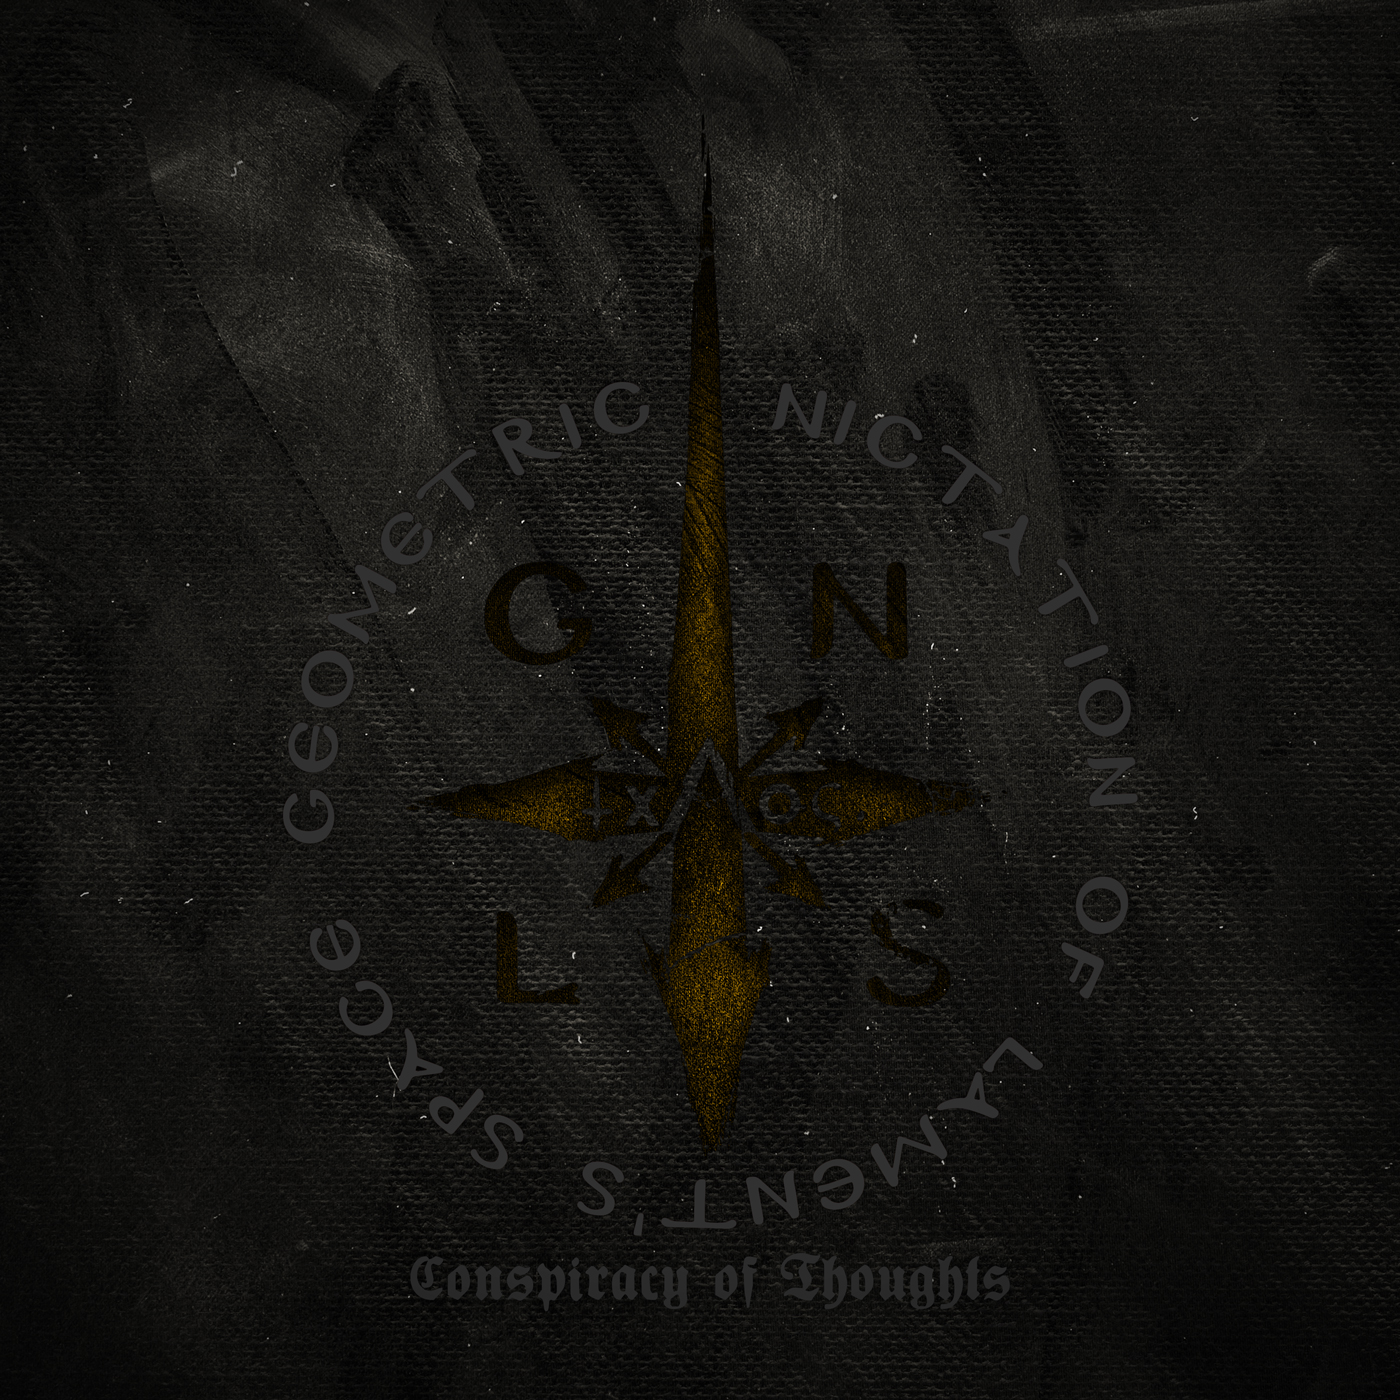 G.N.L.S. (Geometric Nictation of Lament’s Space) – Conspiracy of Thoughts